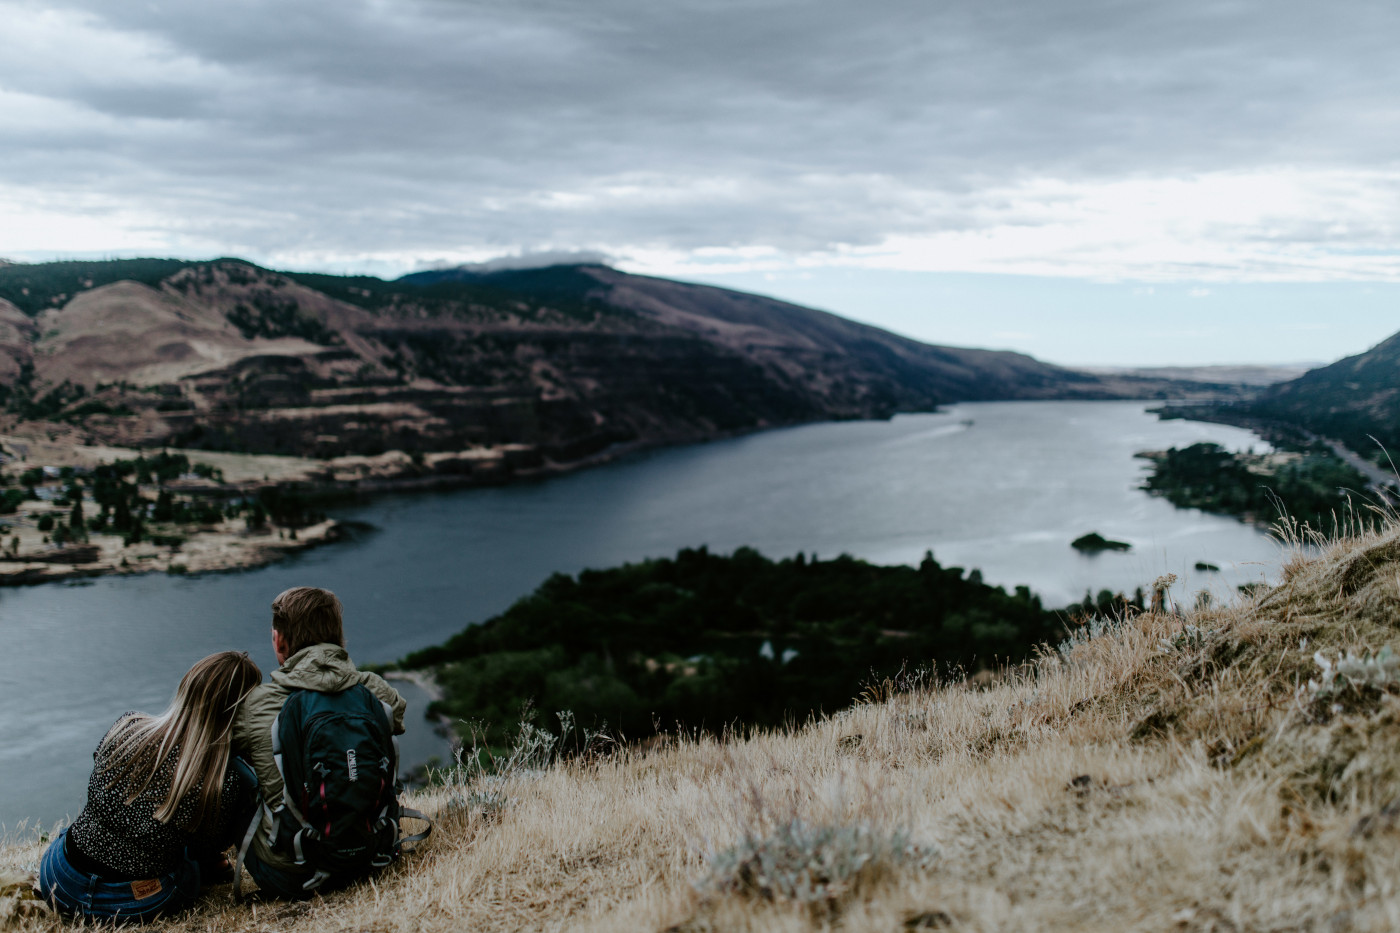 Emily and Greyson look out at the view. Elopement photography at Rowena Crest by Sienna Plus Josh.